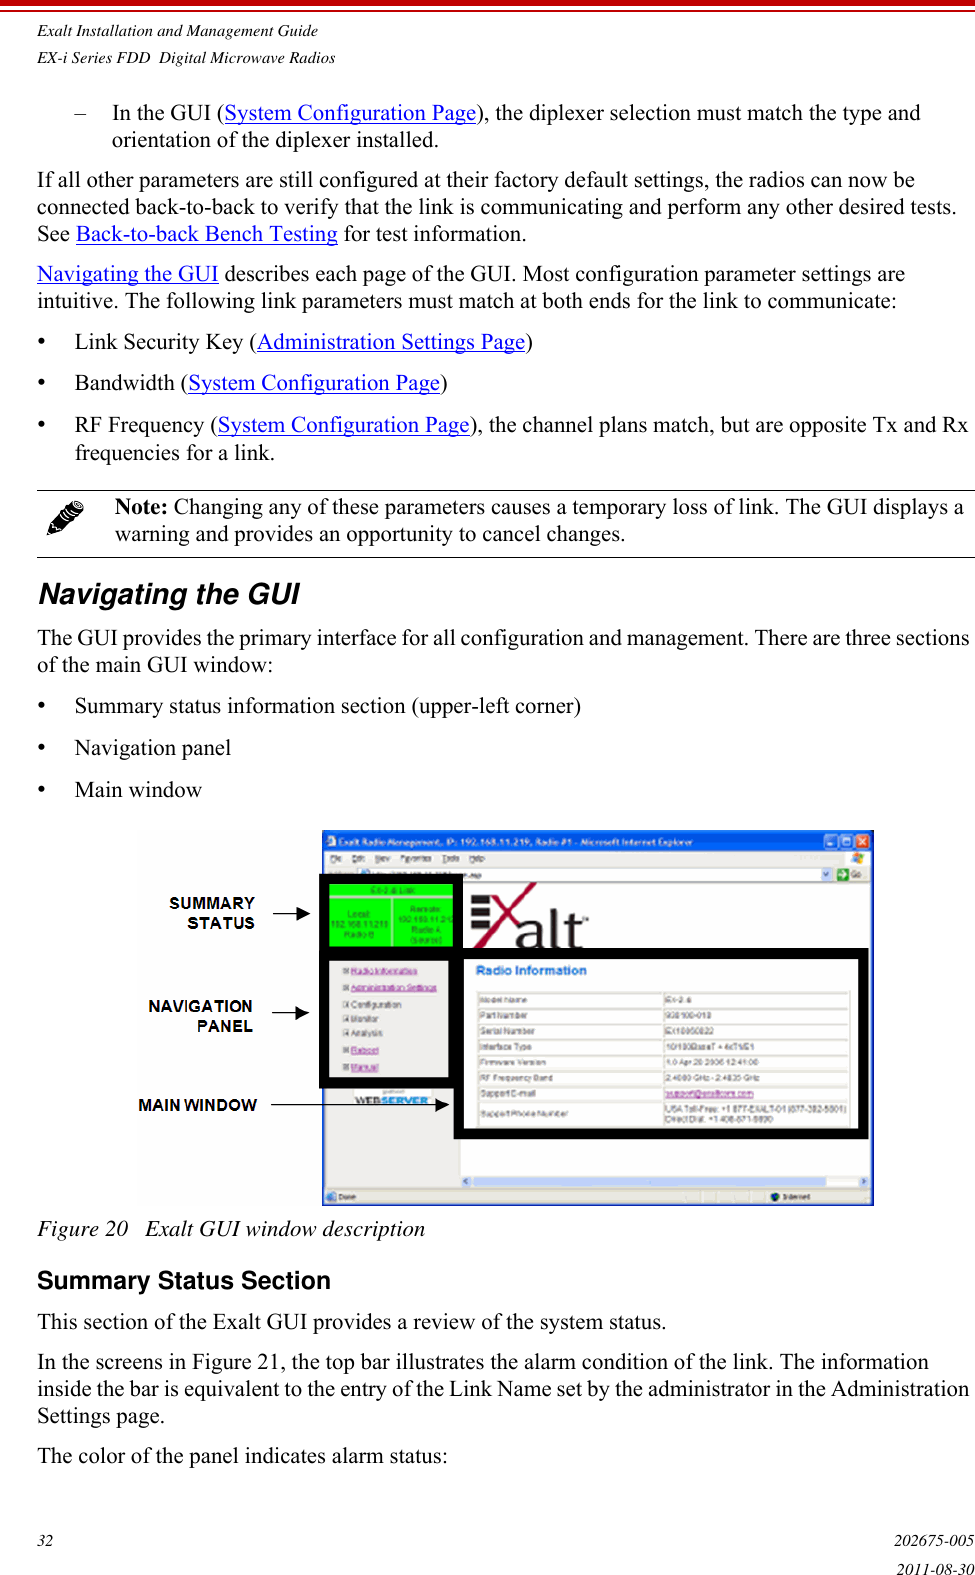 Exalt Installation and Management GuideEX-i Series FDD  Digital Microwave Radios32 202675-0052011-08-30– In the GUI (System Configuration Page), the diplexer selection must match the type and orientation of the diplexer installed.If all other parameters are still configured at their factory default settings, the radios can now be connected back-to-back to verify that the link is communicating and perform any other desired tests. See Back-to-back Bench Testing for test information.Navigating the GUI describes each page of the GUI. Most configuration parameter settings are intuitive. The following link parameters must match at both ends for the link to communicate:•Link Security Key (Administration Settings Page)•Bandwidth (System Configuration Page)•RF Frequency (System Configuration Page), the channel plans match, but are opposite Tx and Rx frequencies for a link.Navigating the GUIThe GUI provides the primary interface for all configuration and management. There are three sections of the main GUI window:•Summary status information section (upper-left corner)•Navigation panel •Main windowFigure 20   Exalt GUI window descriptionSummary Status SectionThis section of the Exalt GUI provides a review of the system status. In the screens in Figure 21, the top bar illustrates the alarm condition of the link. The information inside the bar is equivalent to the entry of the Link Name set by the administrator in the Administration Settings page.The color of the panel indicates alarm status: Note: Changing any of these parameters causes a temporary loss of link. The GUI displays a warning and provides an opportunity to cancel changes.